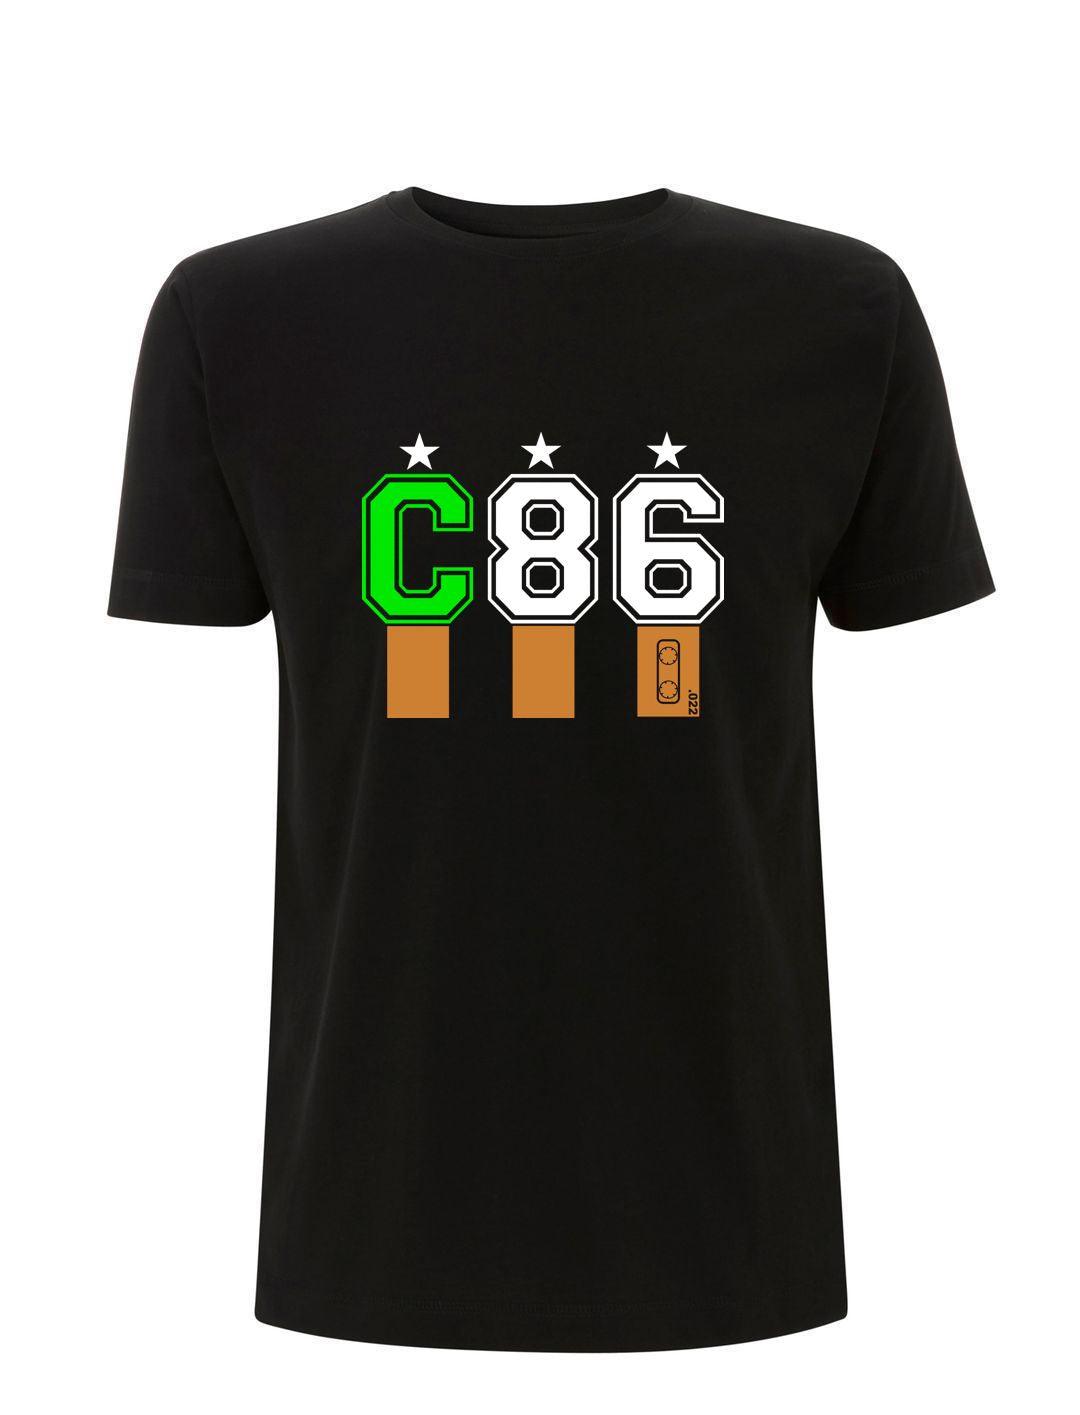 C86: T-Shirt Inspired by The Iconic Indie Music NME Cassette : SOUND IS COLOUR